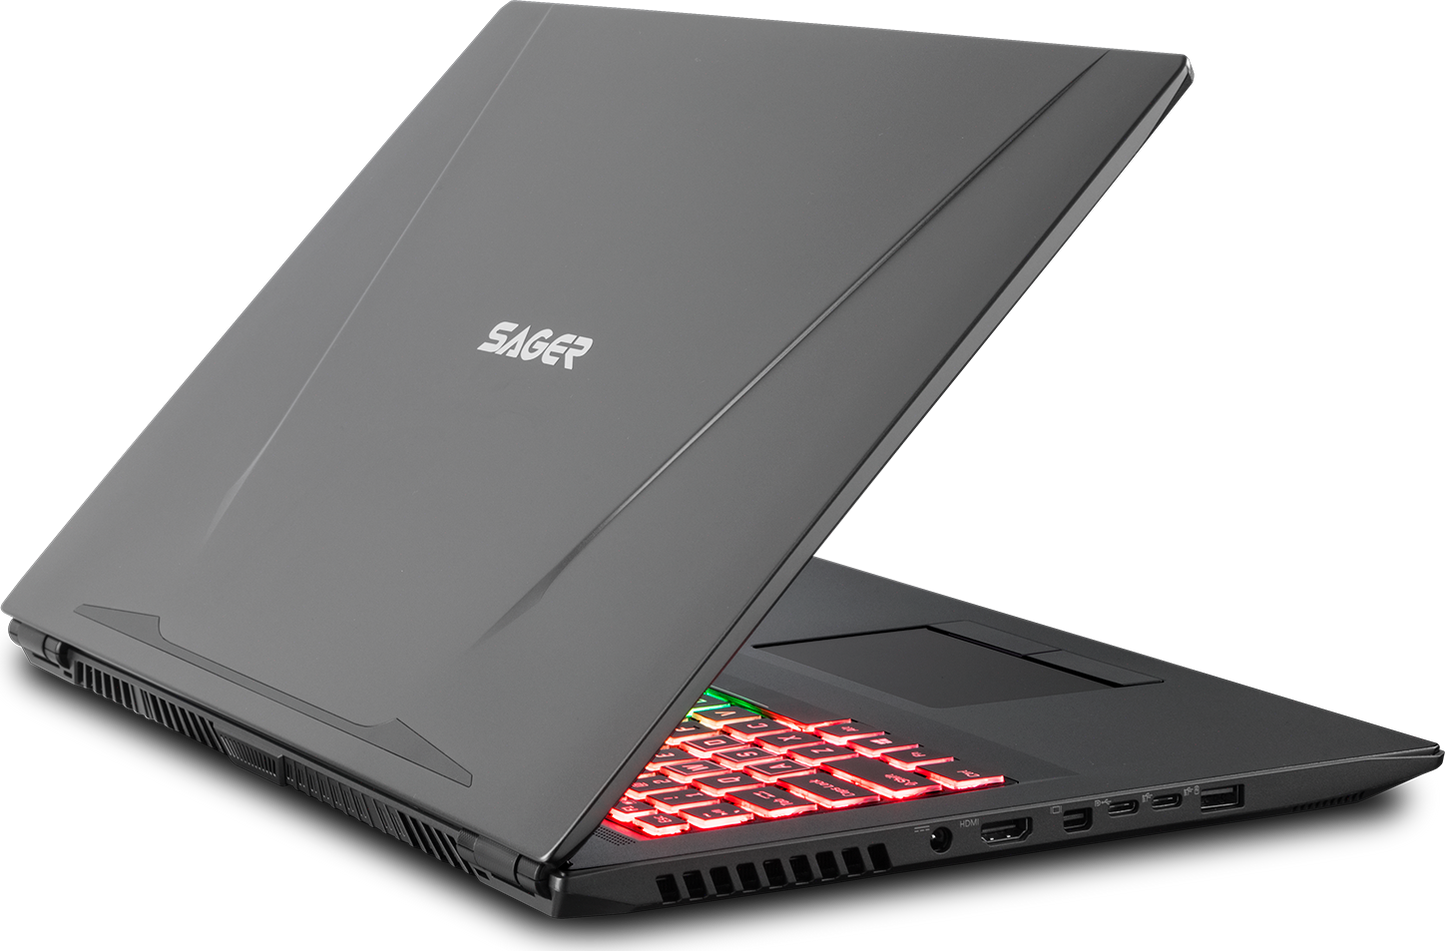 Sager NP8971 (Clevo P970ED)